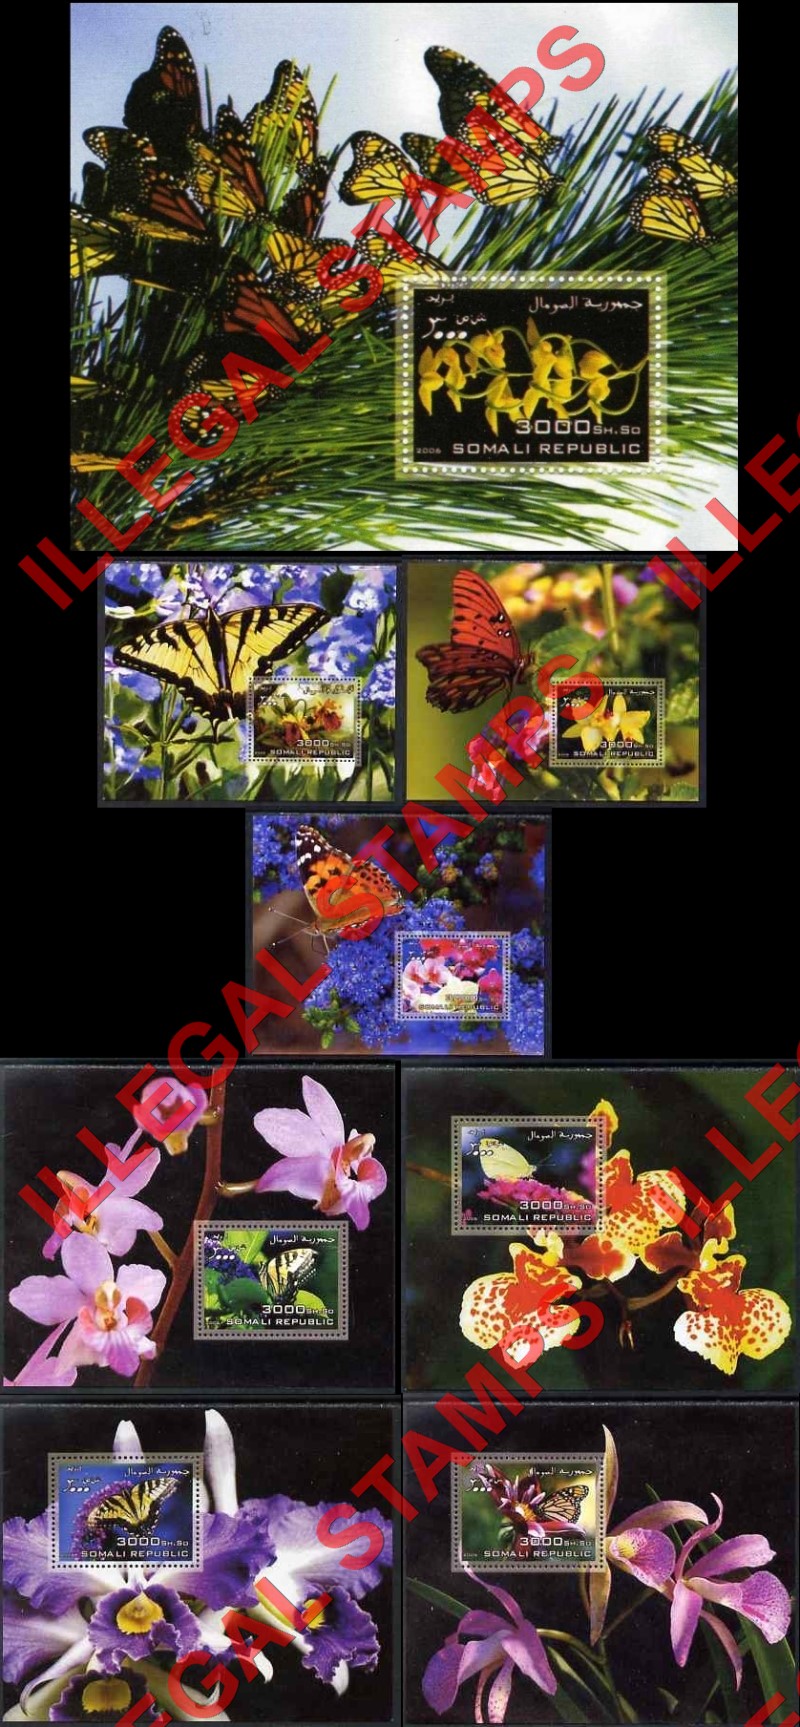 Somalia 2006 Flowers and Butterflies Illegal Stamp Souvenir Sheets of 1